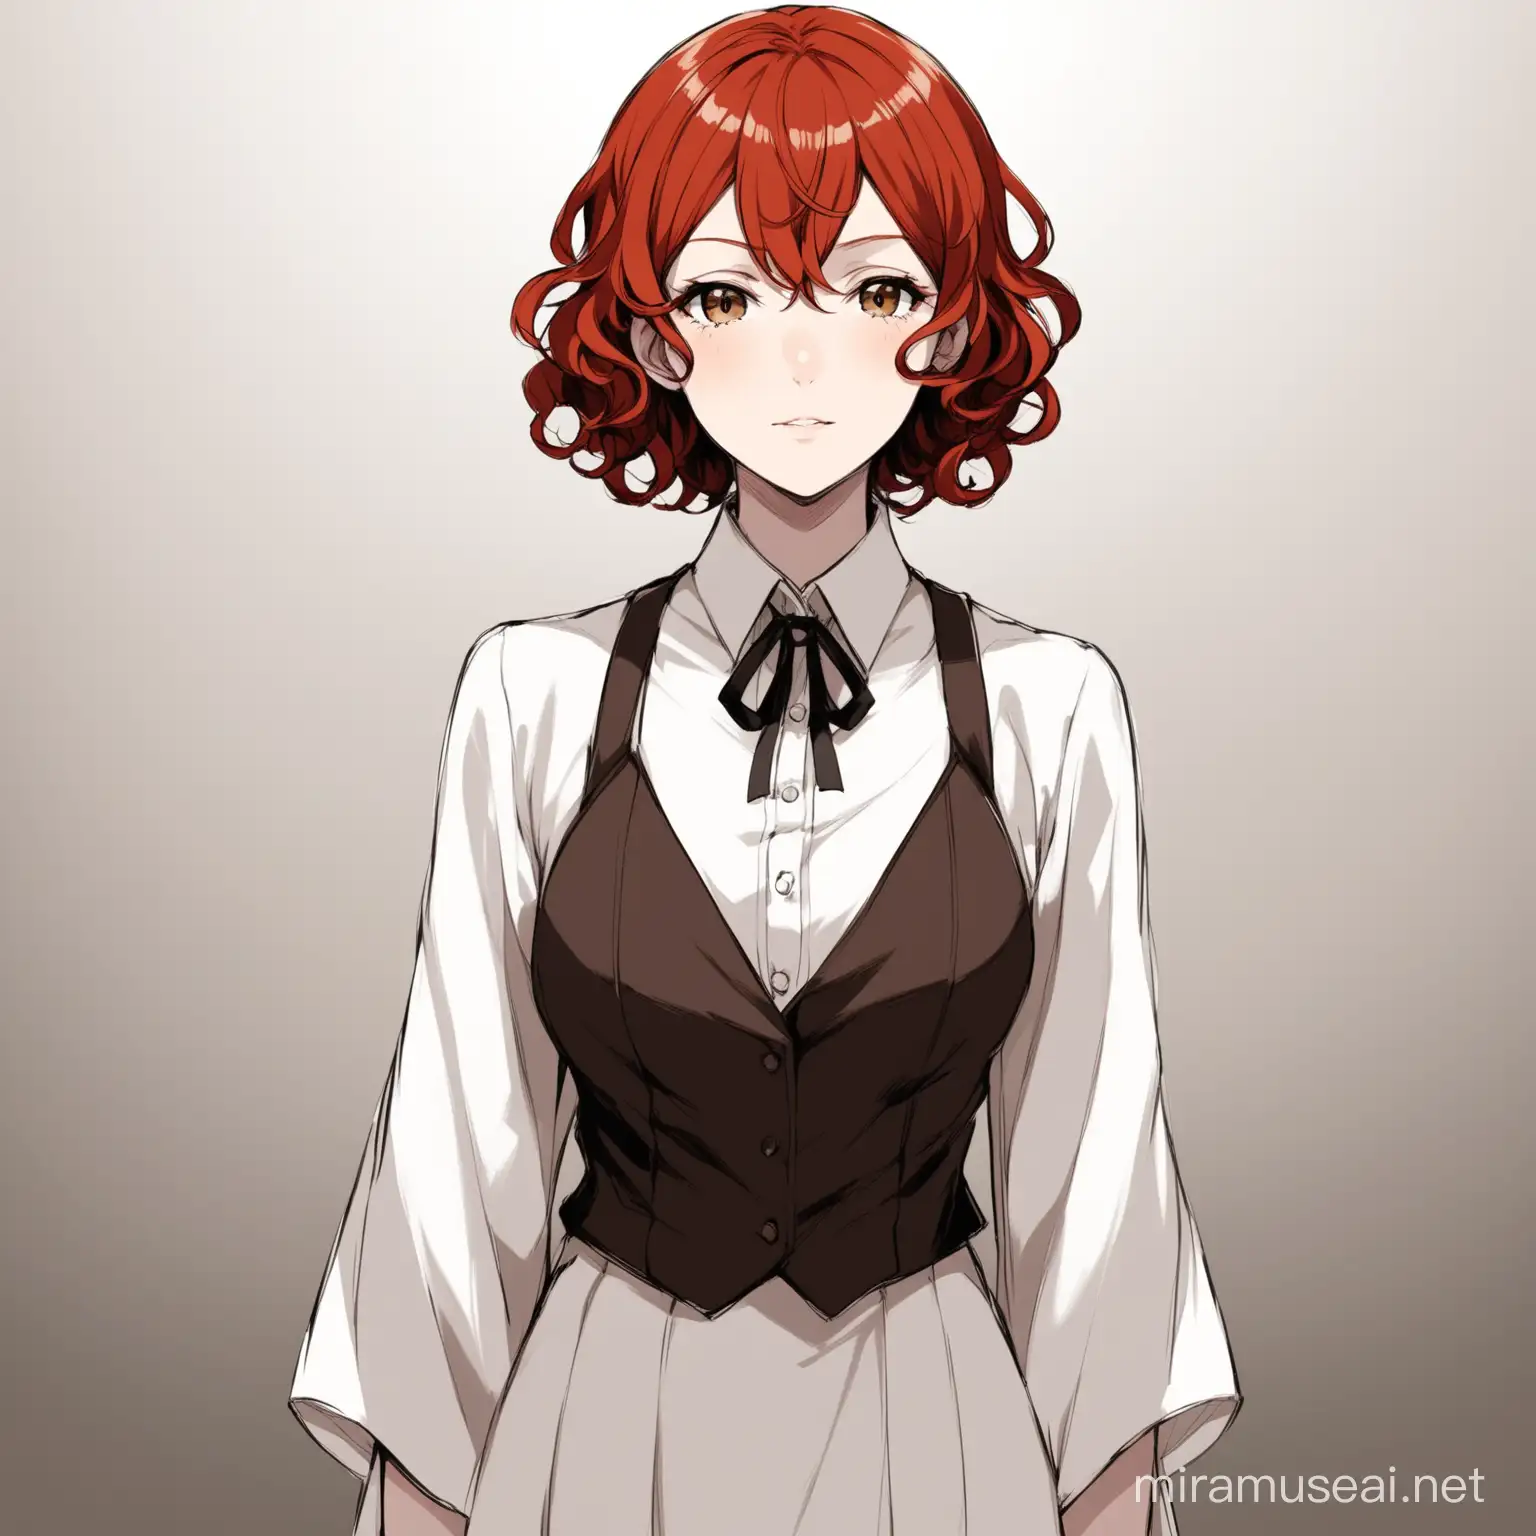 RedHaired Woman with Brown Eyes in Bungou Stray Dogs Style